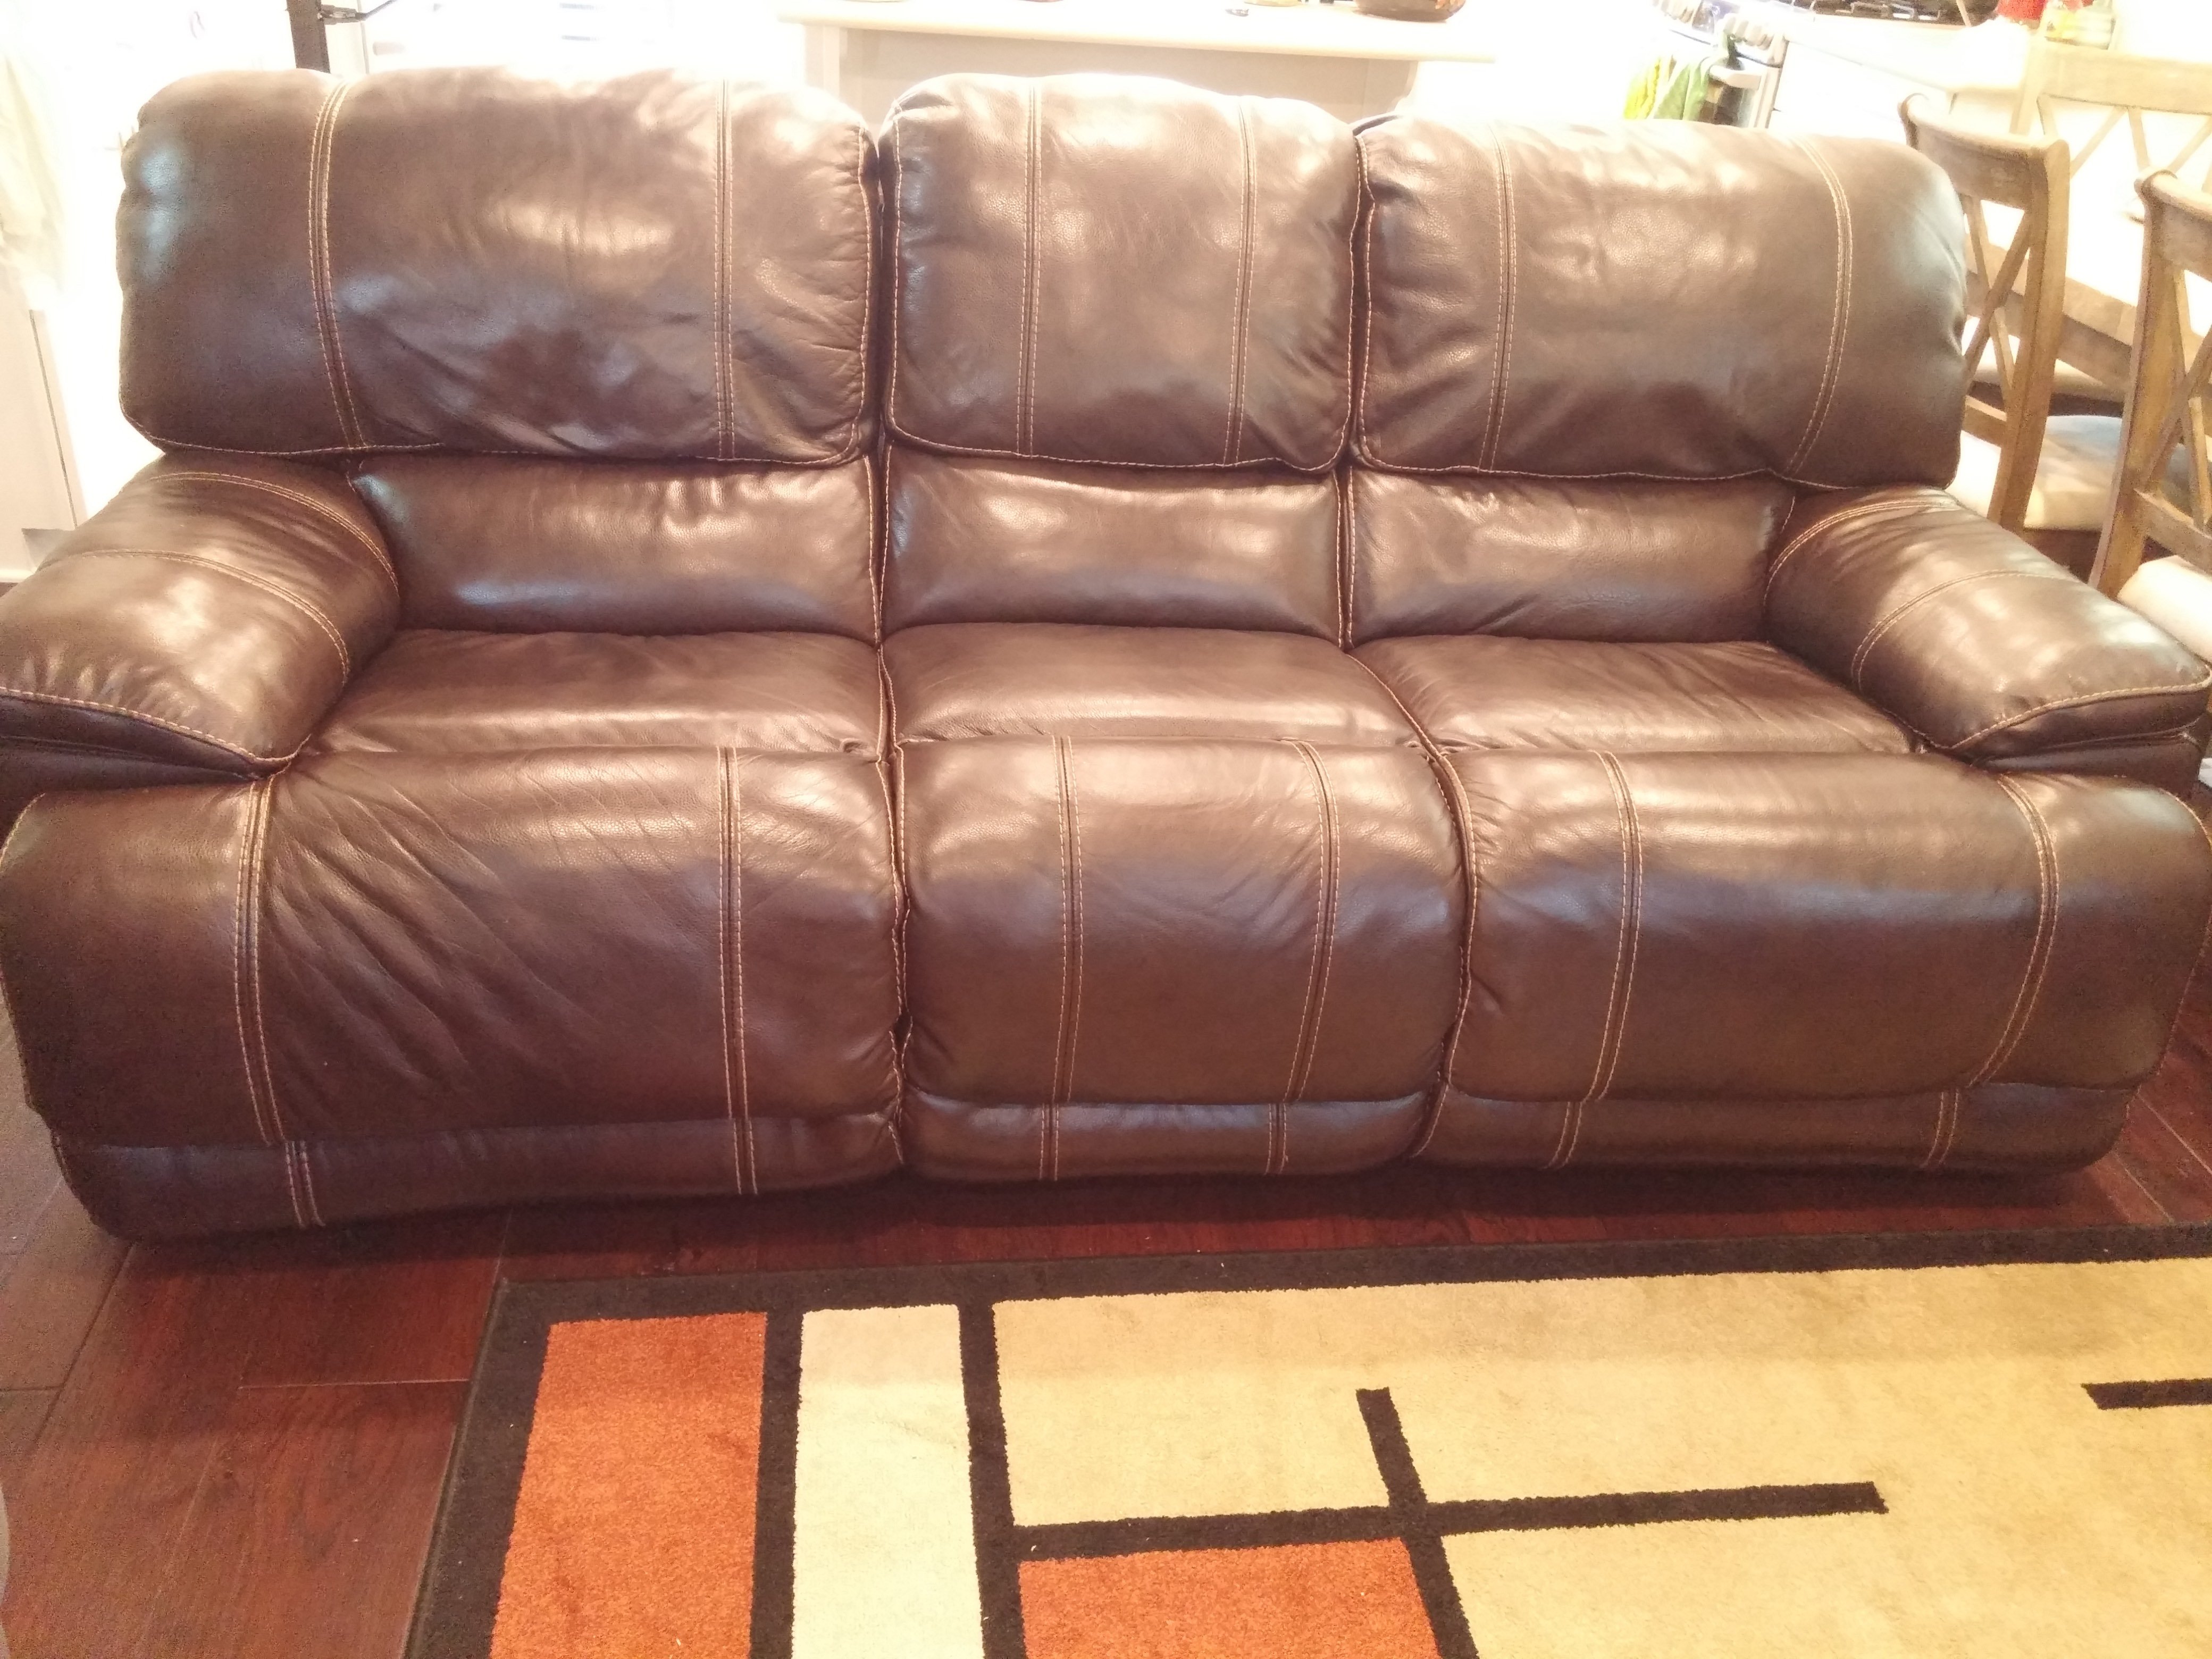 Like new top grain leather recliner sofa for sale $769 OBO